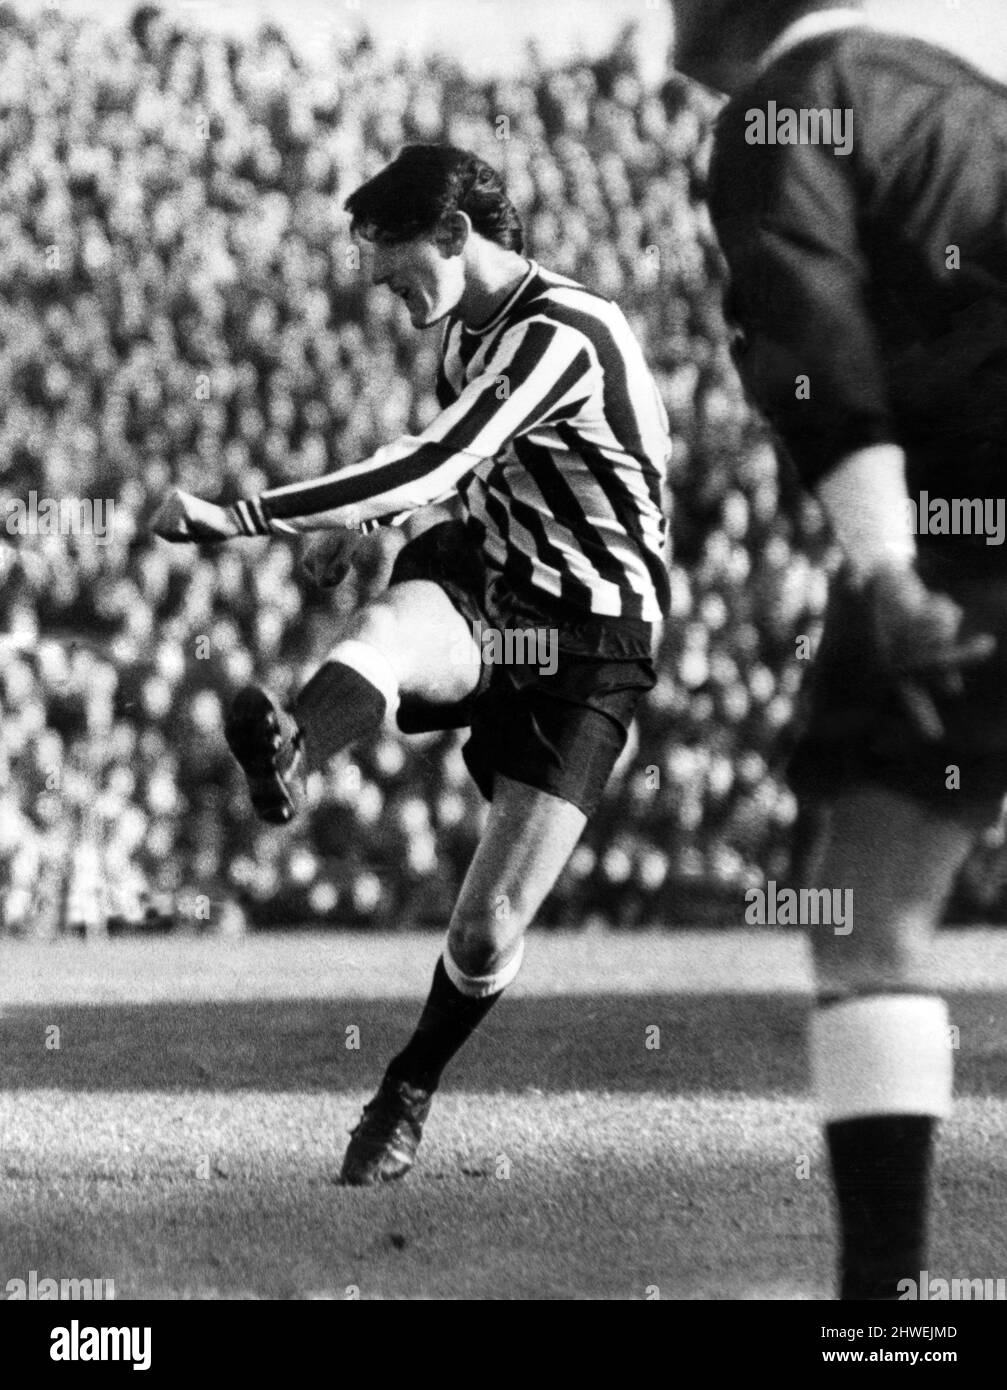 Newcastle's £100,000 Scot, Jim Smith, takes a crack at goal during the Fairs Cup against Dundee. Newcastle United v Dundee United, 1st October 1969. Stock Photo